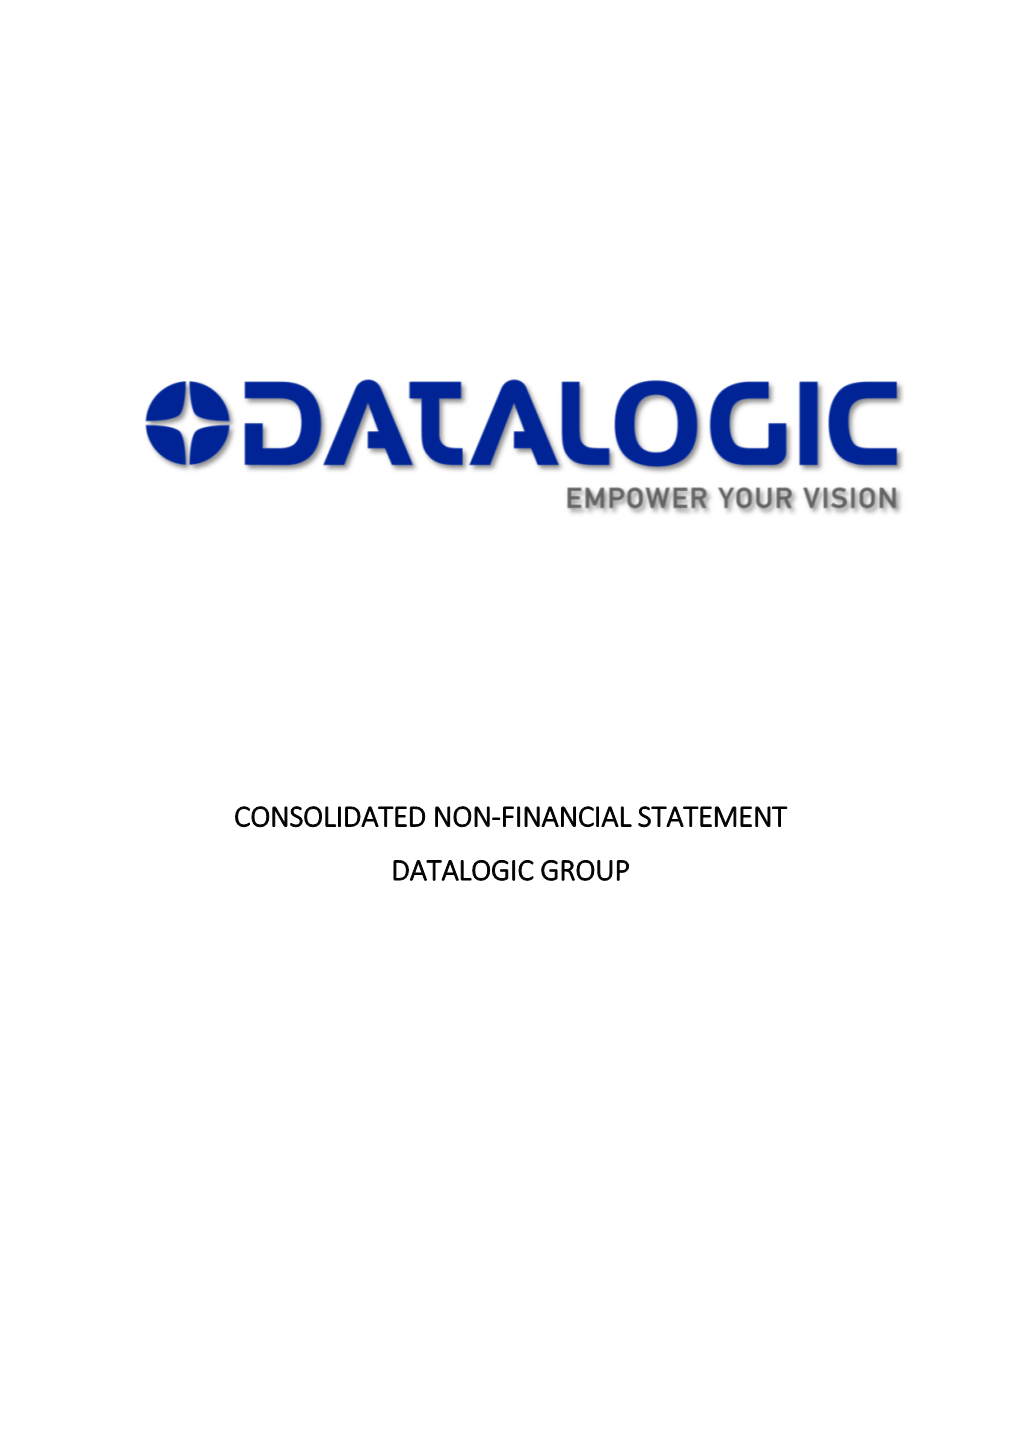 Consolidated Non-Financial Statement Datalogic Group